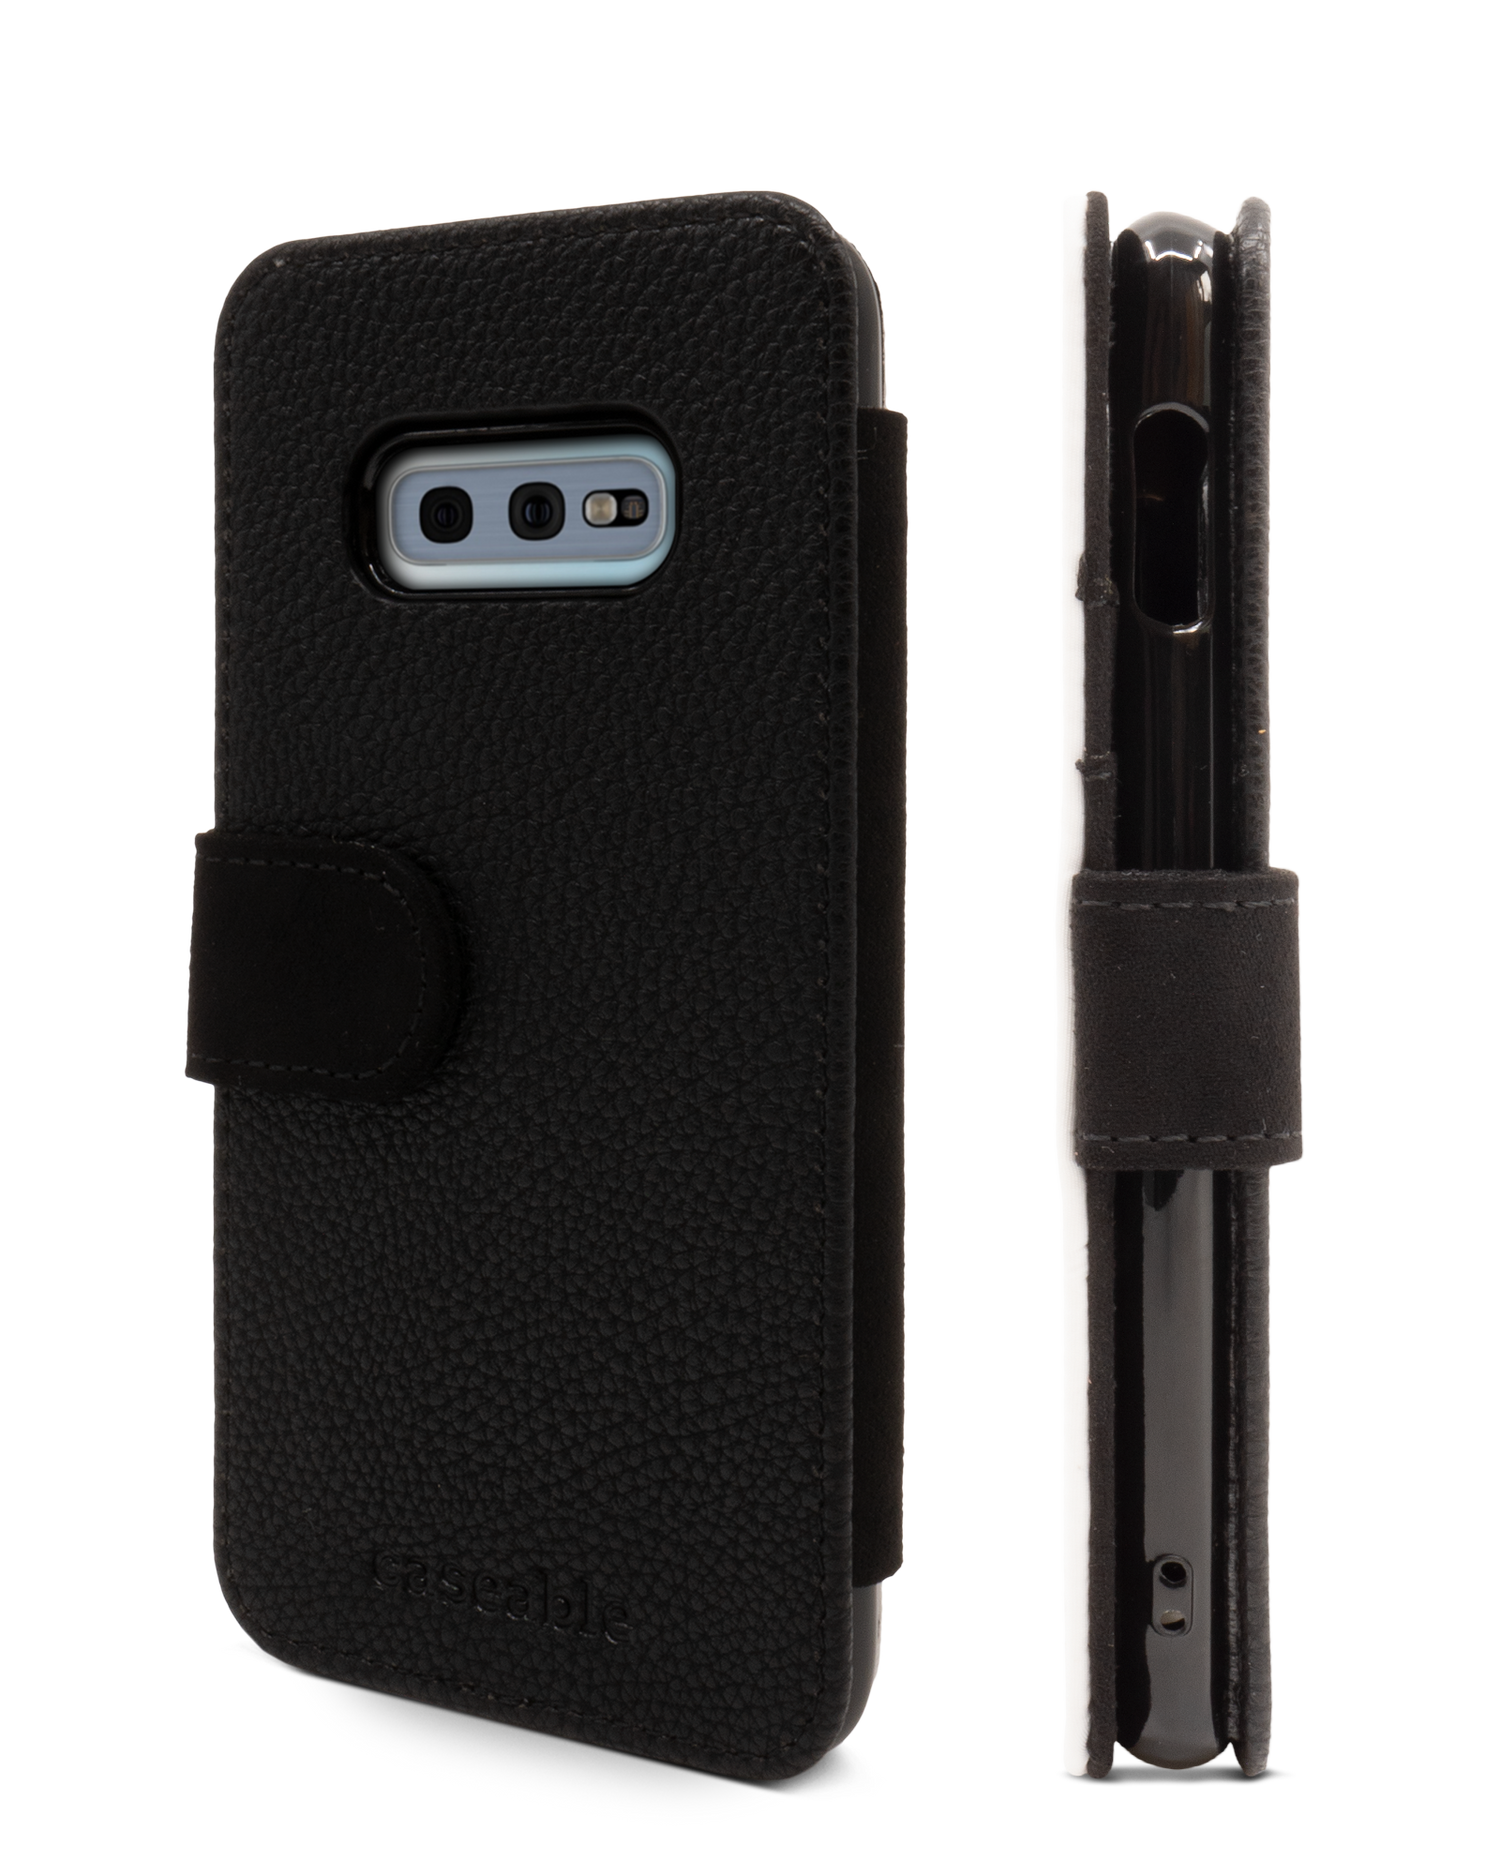 Grids Wallet Phone Case Samsung Galaxy S10e: Side View